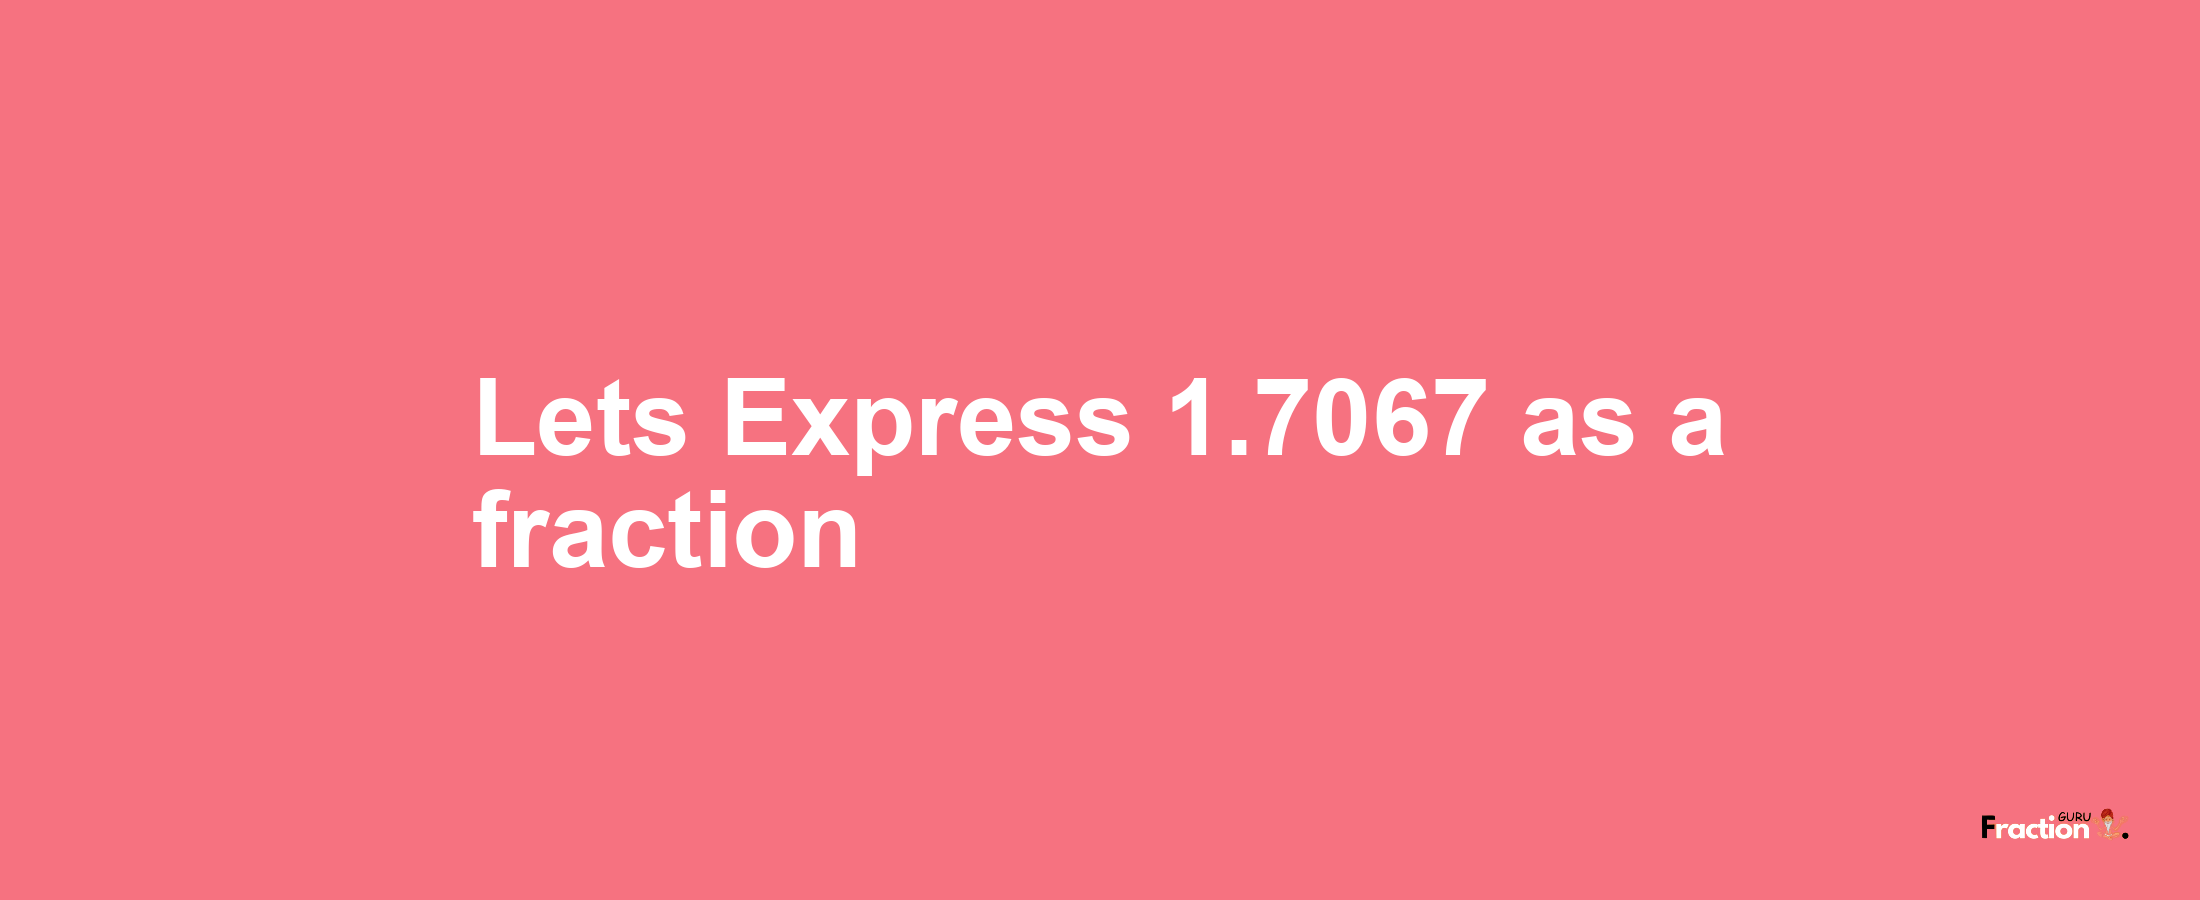 Lets Express 1.7067 as afraction